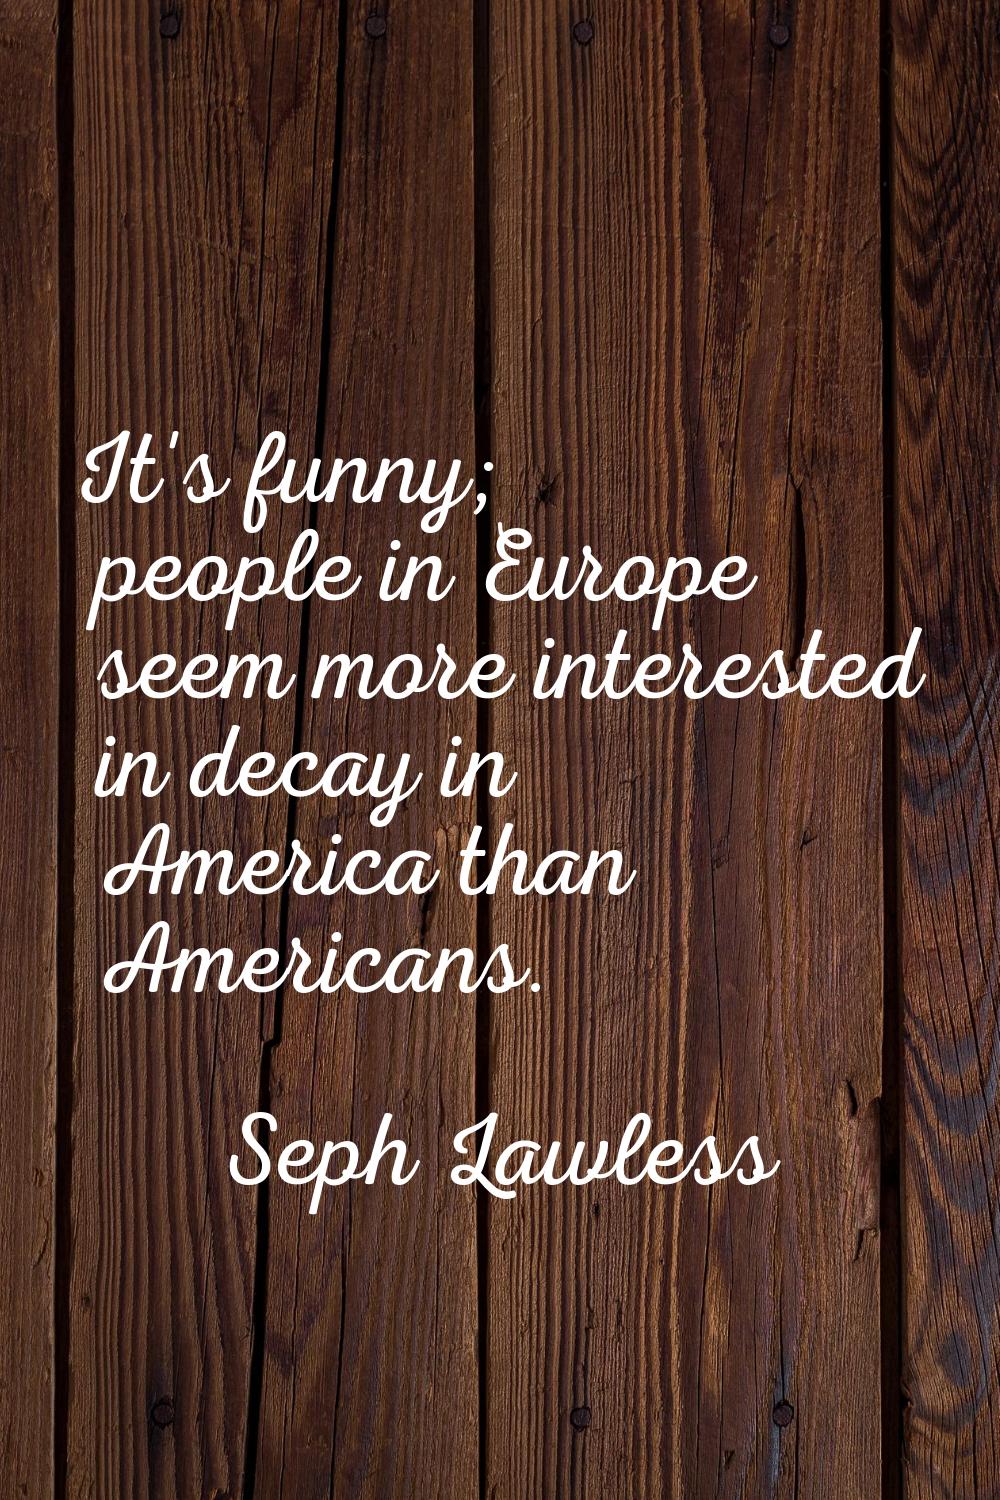 It's funny; people in Europe seem more interested in decay in America than Americans.